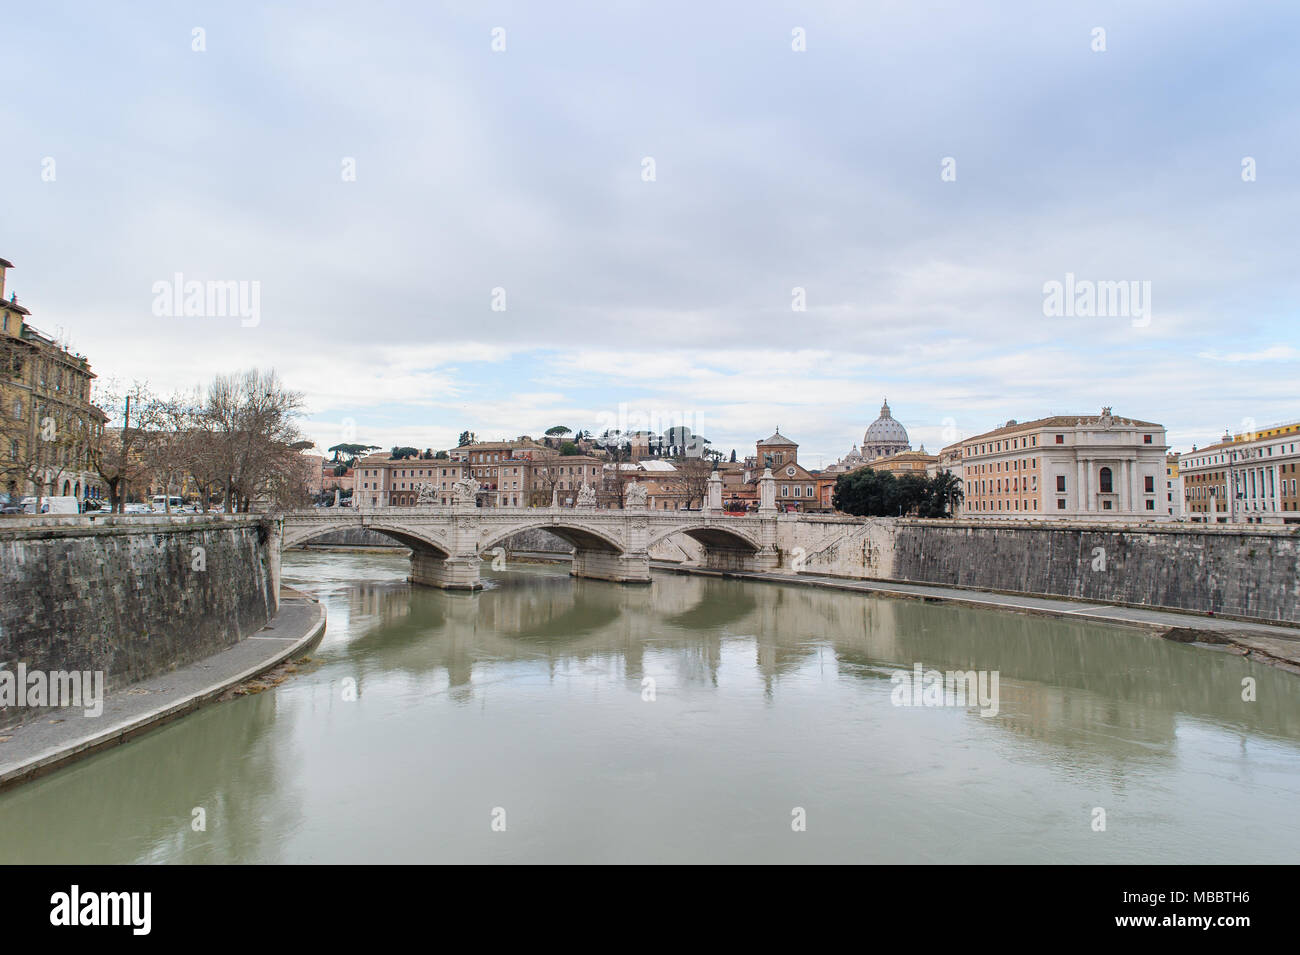 ROME, ITALY - JANUARY 27, 2010: View of Rome with the tiber river. Stock Photo